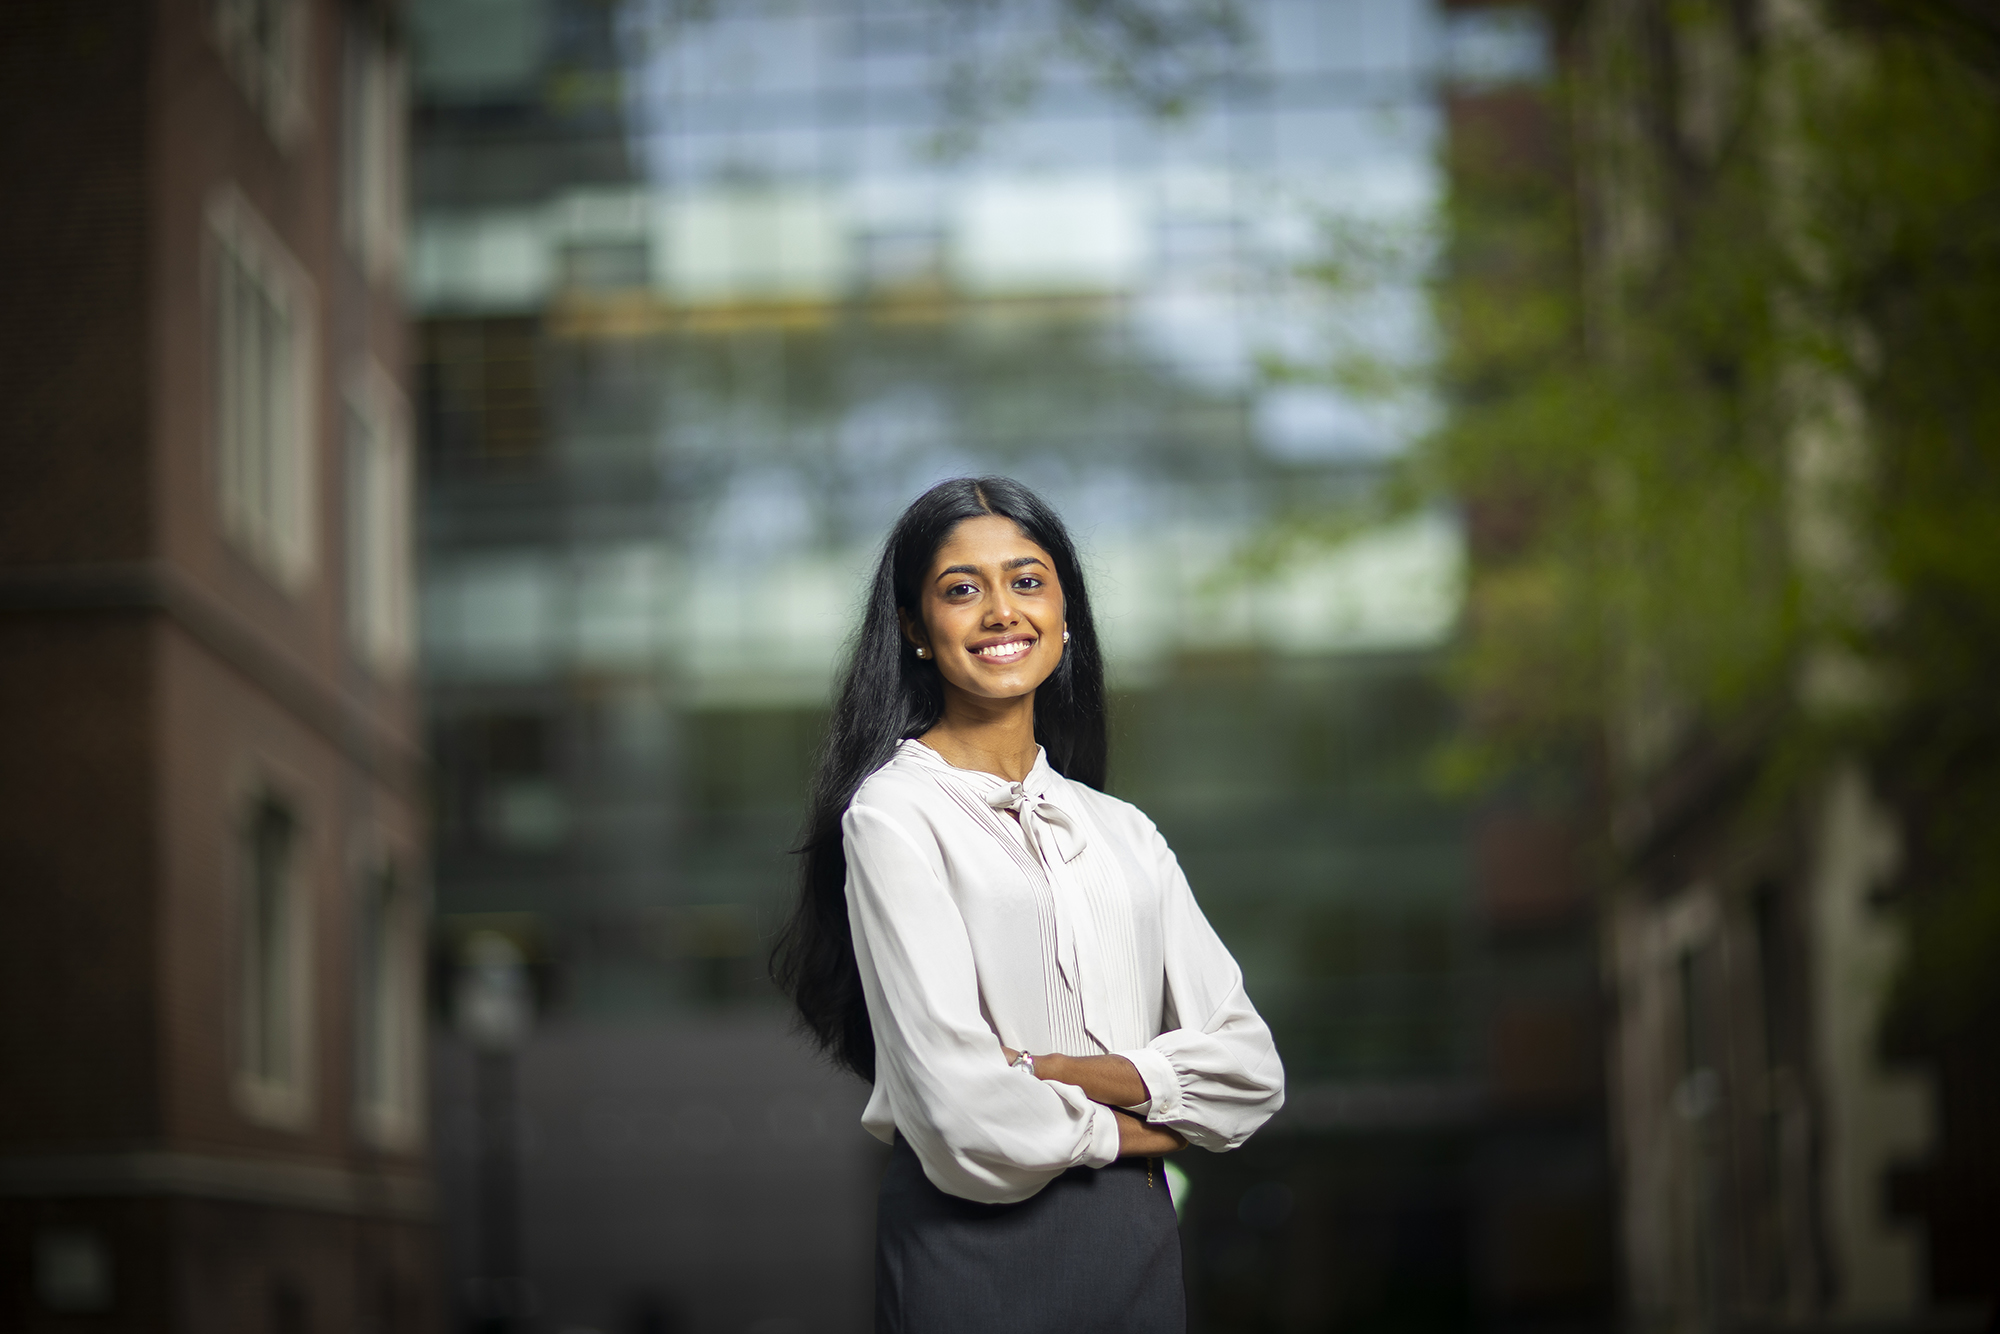 Penn fourth-year Gauthami Moorkanat poses with her arms crossed outside Fisher-Bennett Hall on Penn campus.